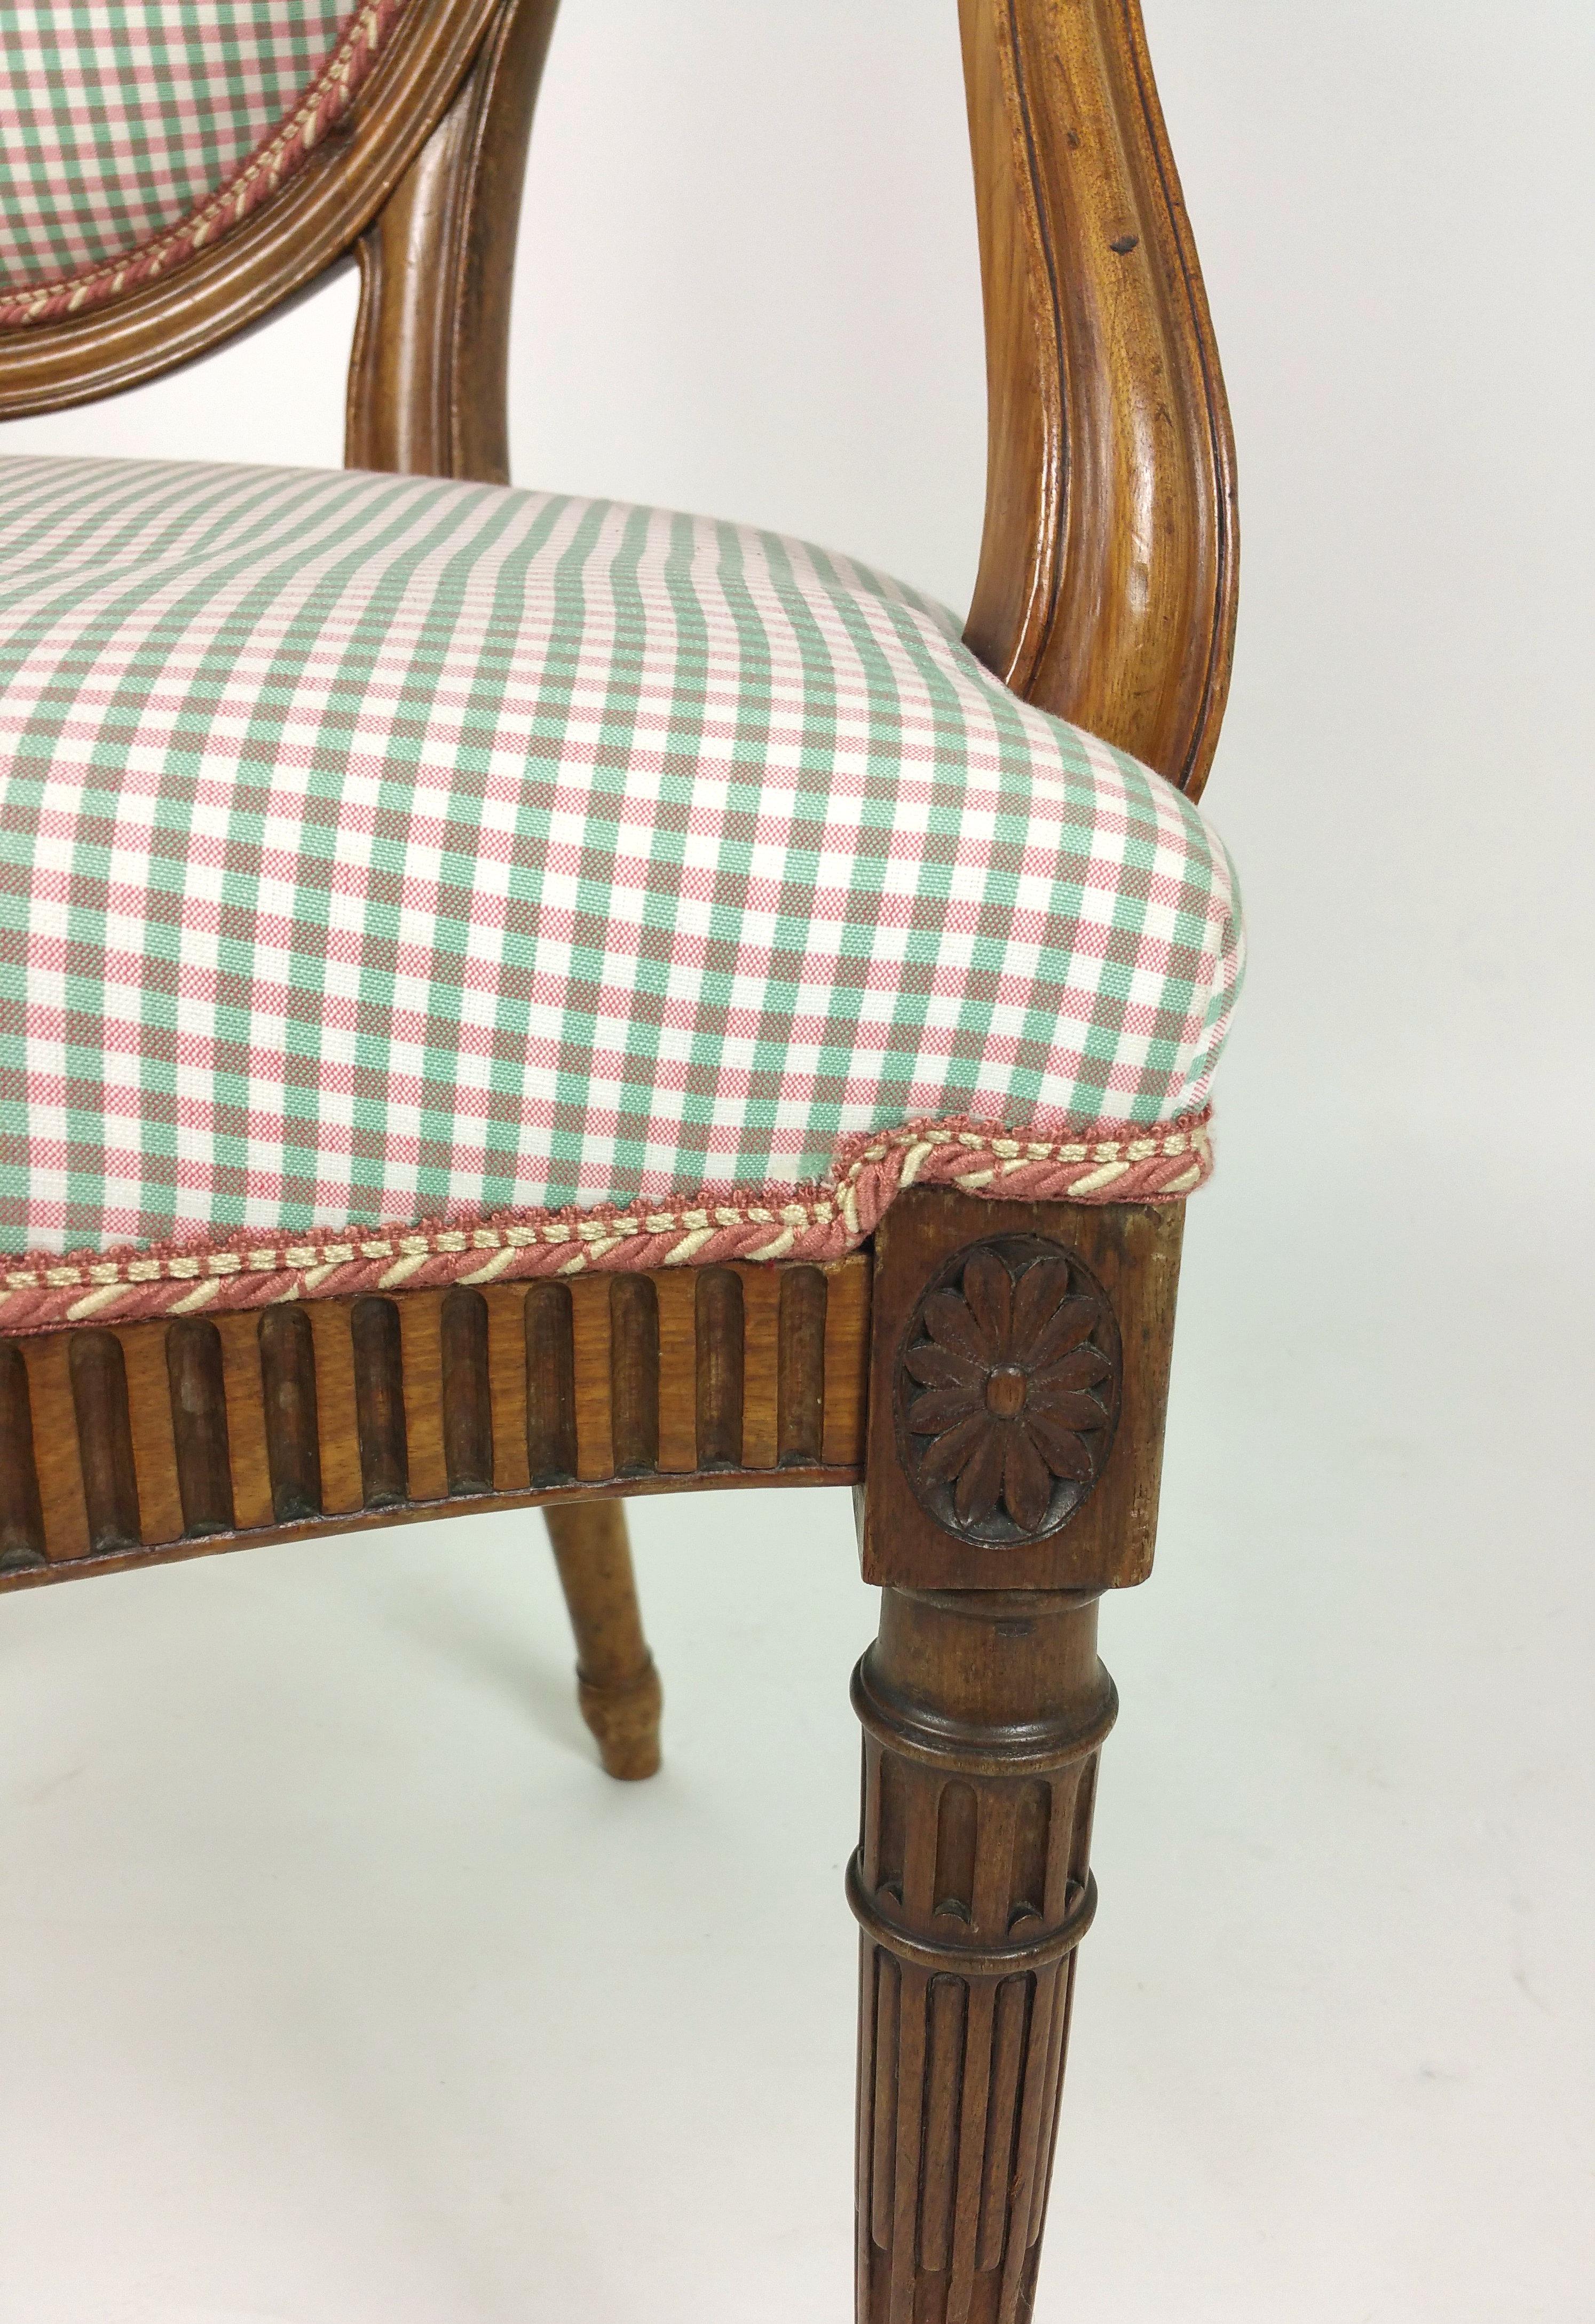 This 19th century Hepplewhite design carved walnut elbow chair carved with acanthus leaves supported on tapered turned legs and upholstered in a bright red and green small check fabric. It measures 23 ¼ in – 59 cm wide, 19 in – 48.2 cm deep and 37